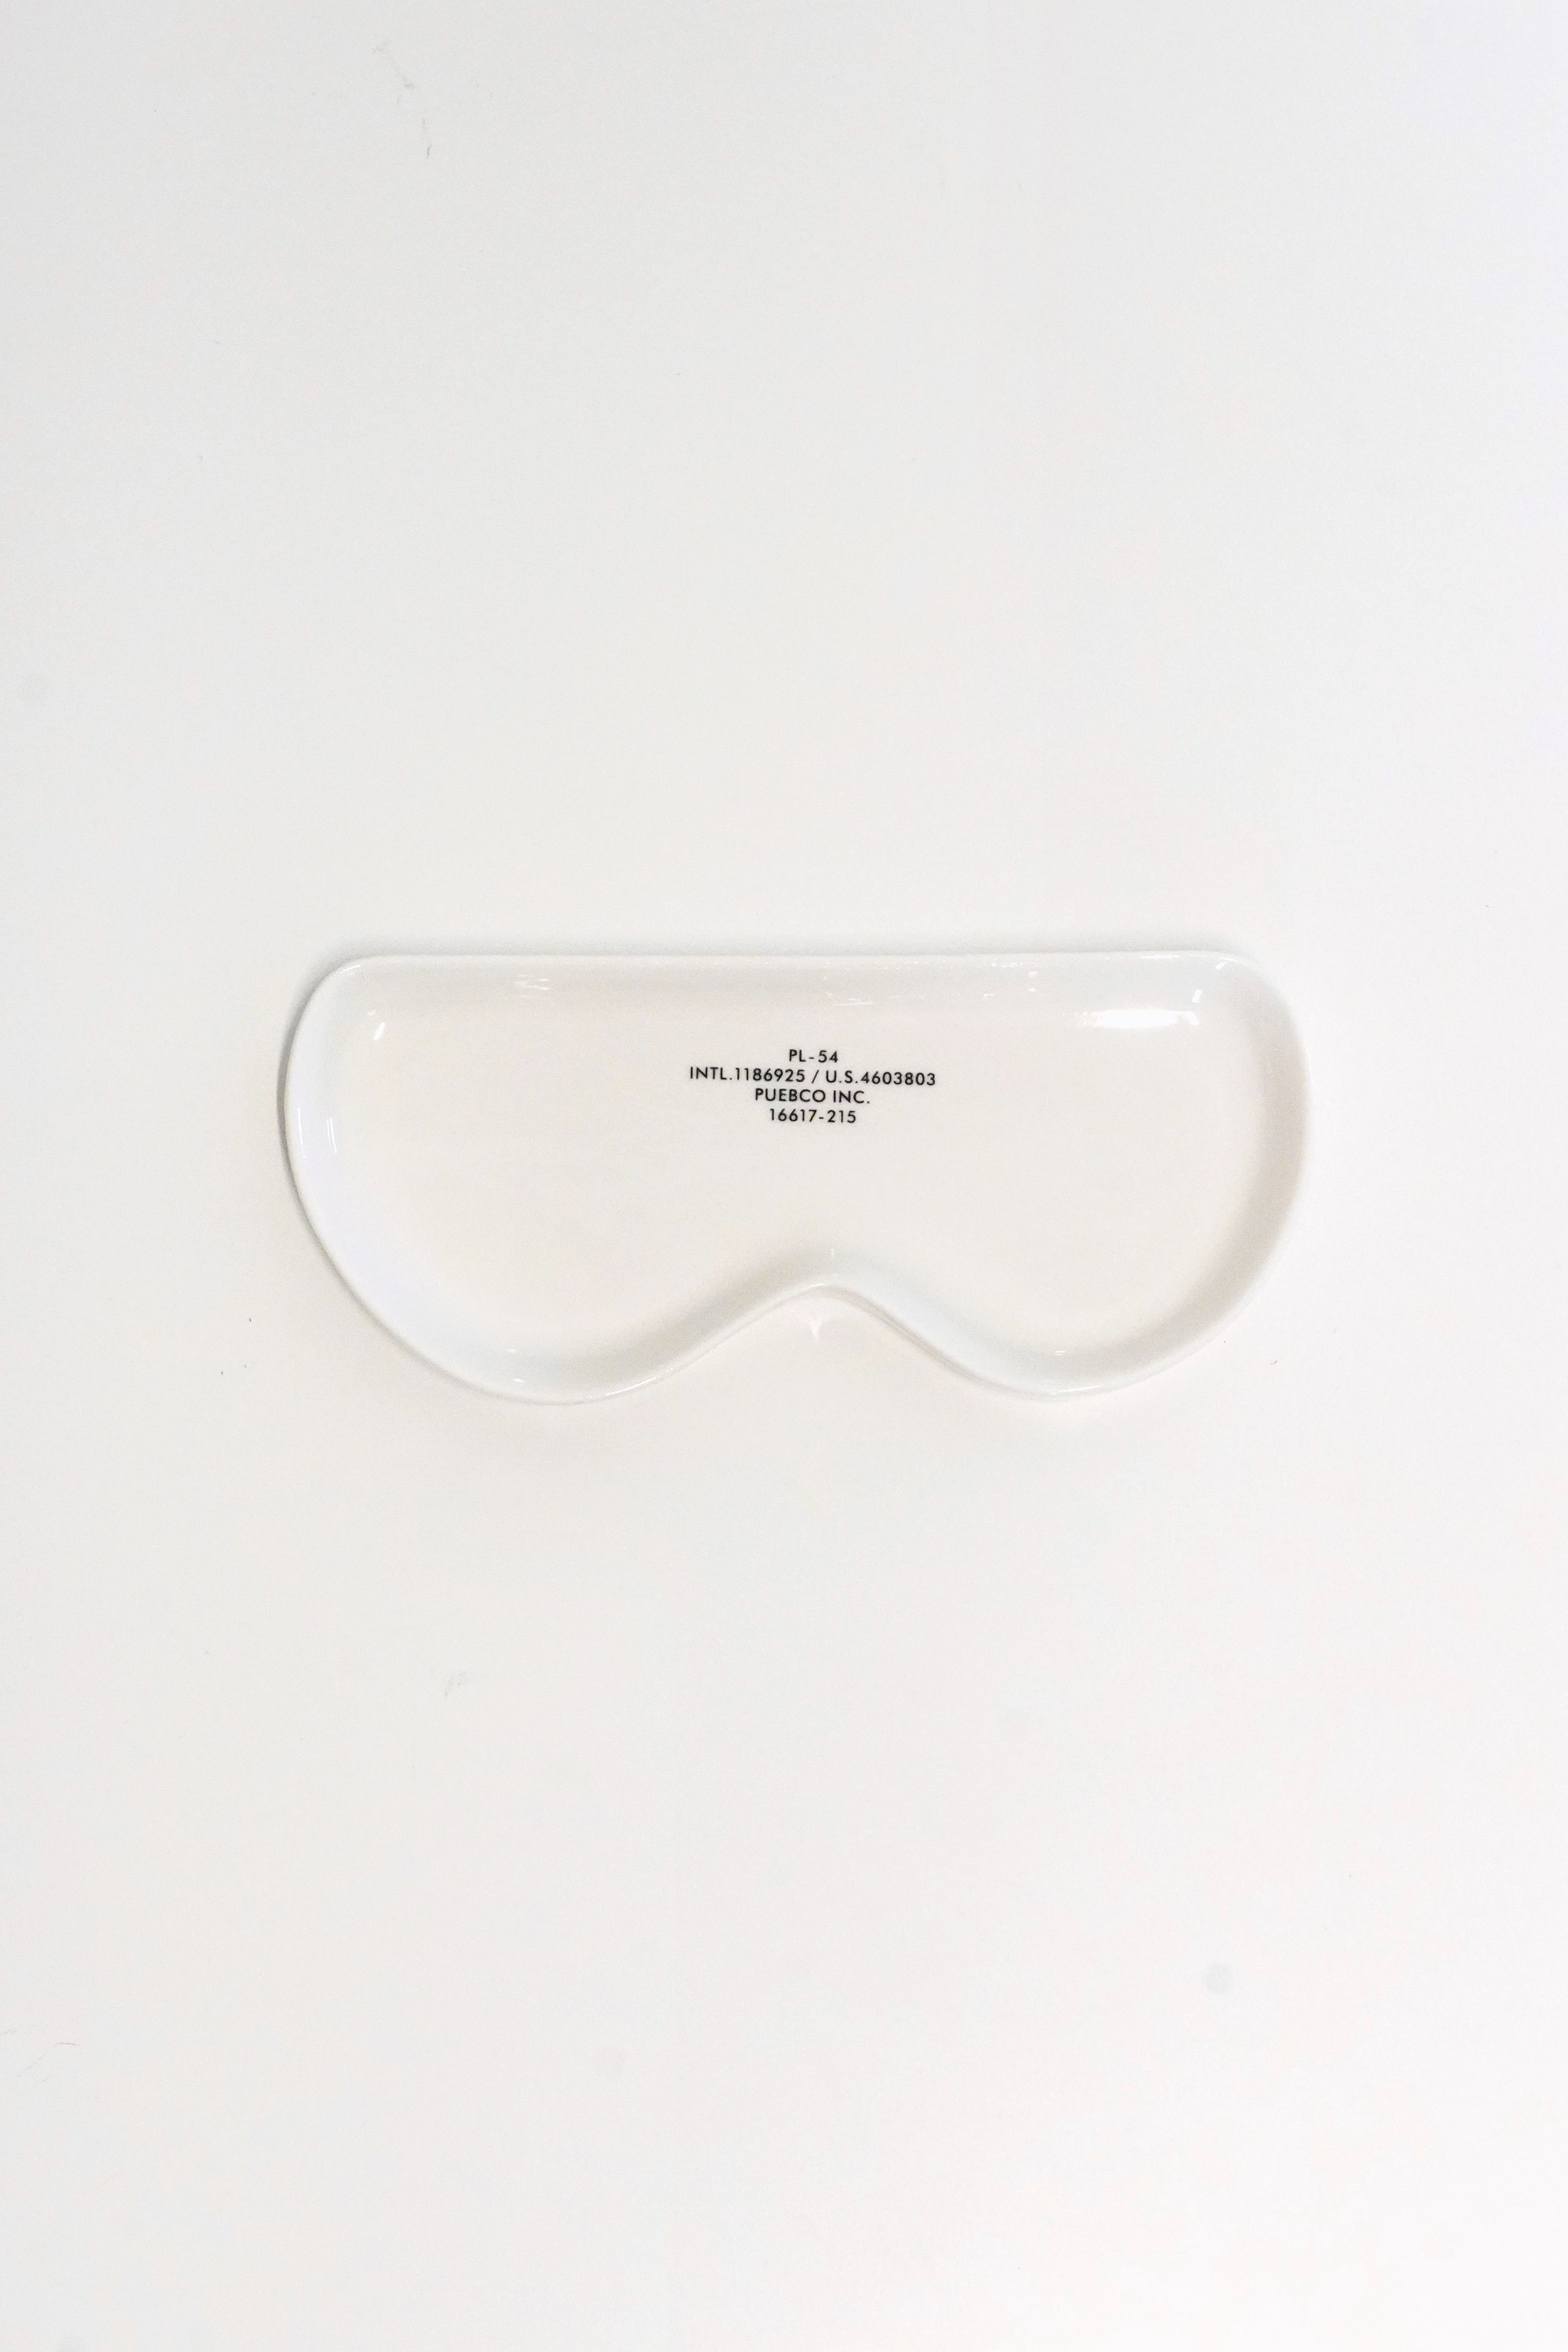 [PUEBCO]  Glasses Tray - Round